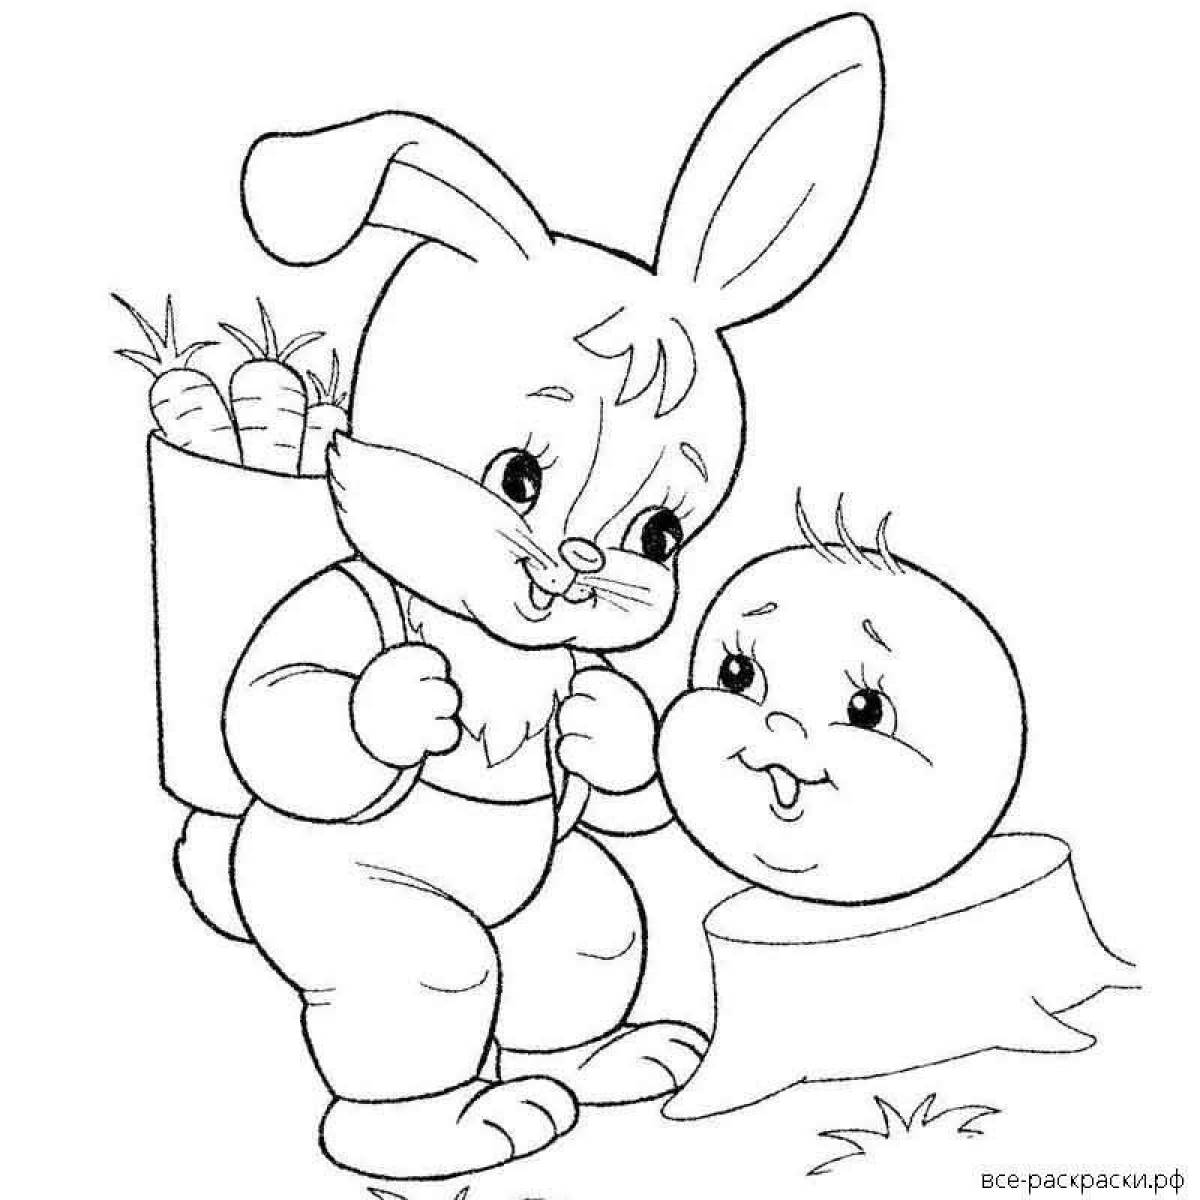 Coloring page charming gingerbread man for children 2-3 years old